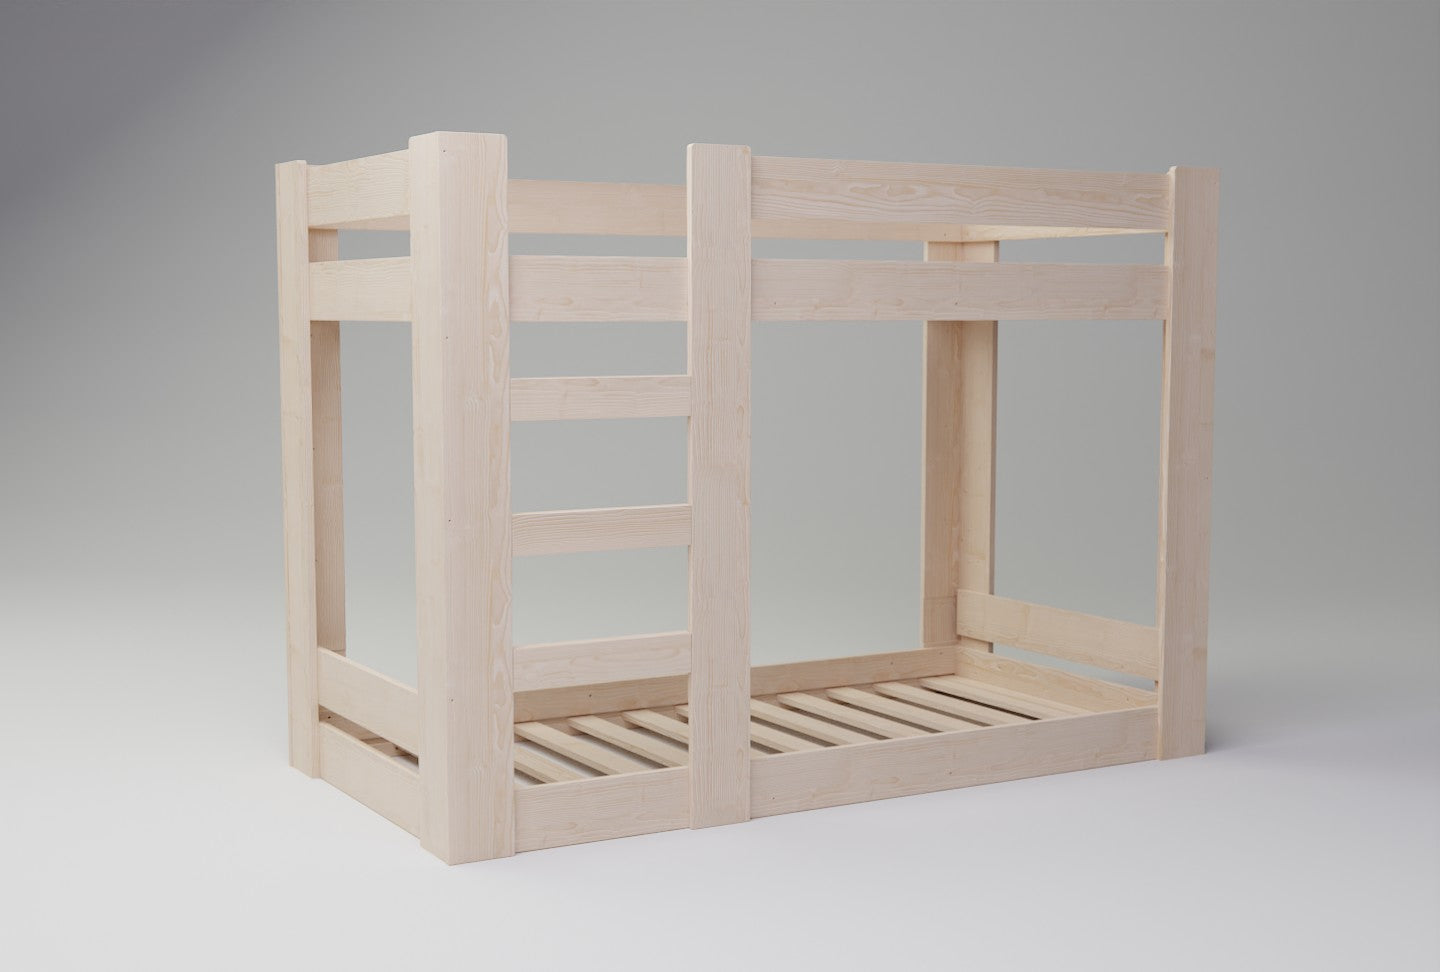 Need more storage? Our bunk bed comes with an optional drawer that fits neatly under the lower bunk. Plus, it’s made from sustainable NZ Pine.